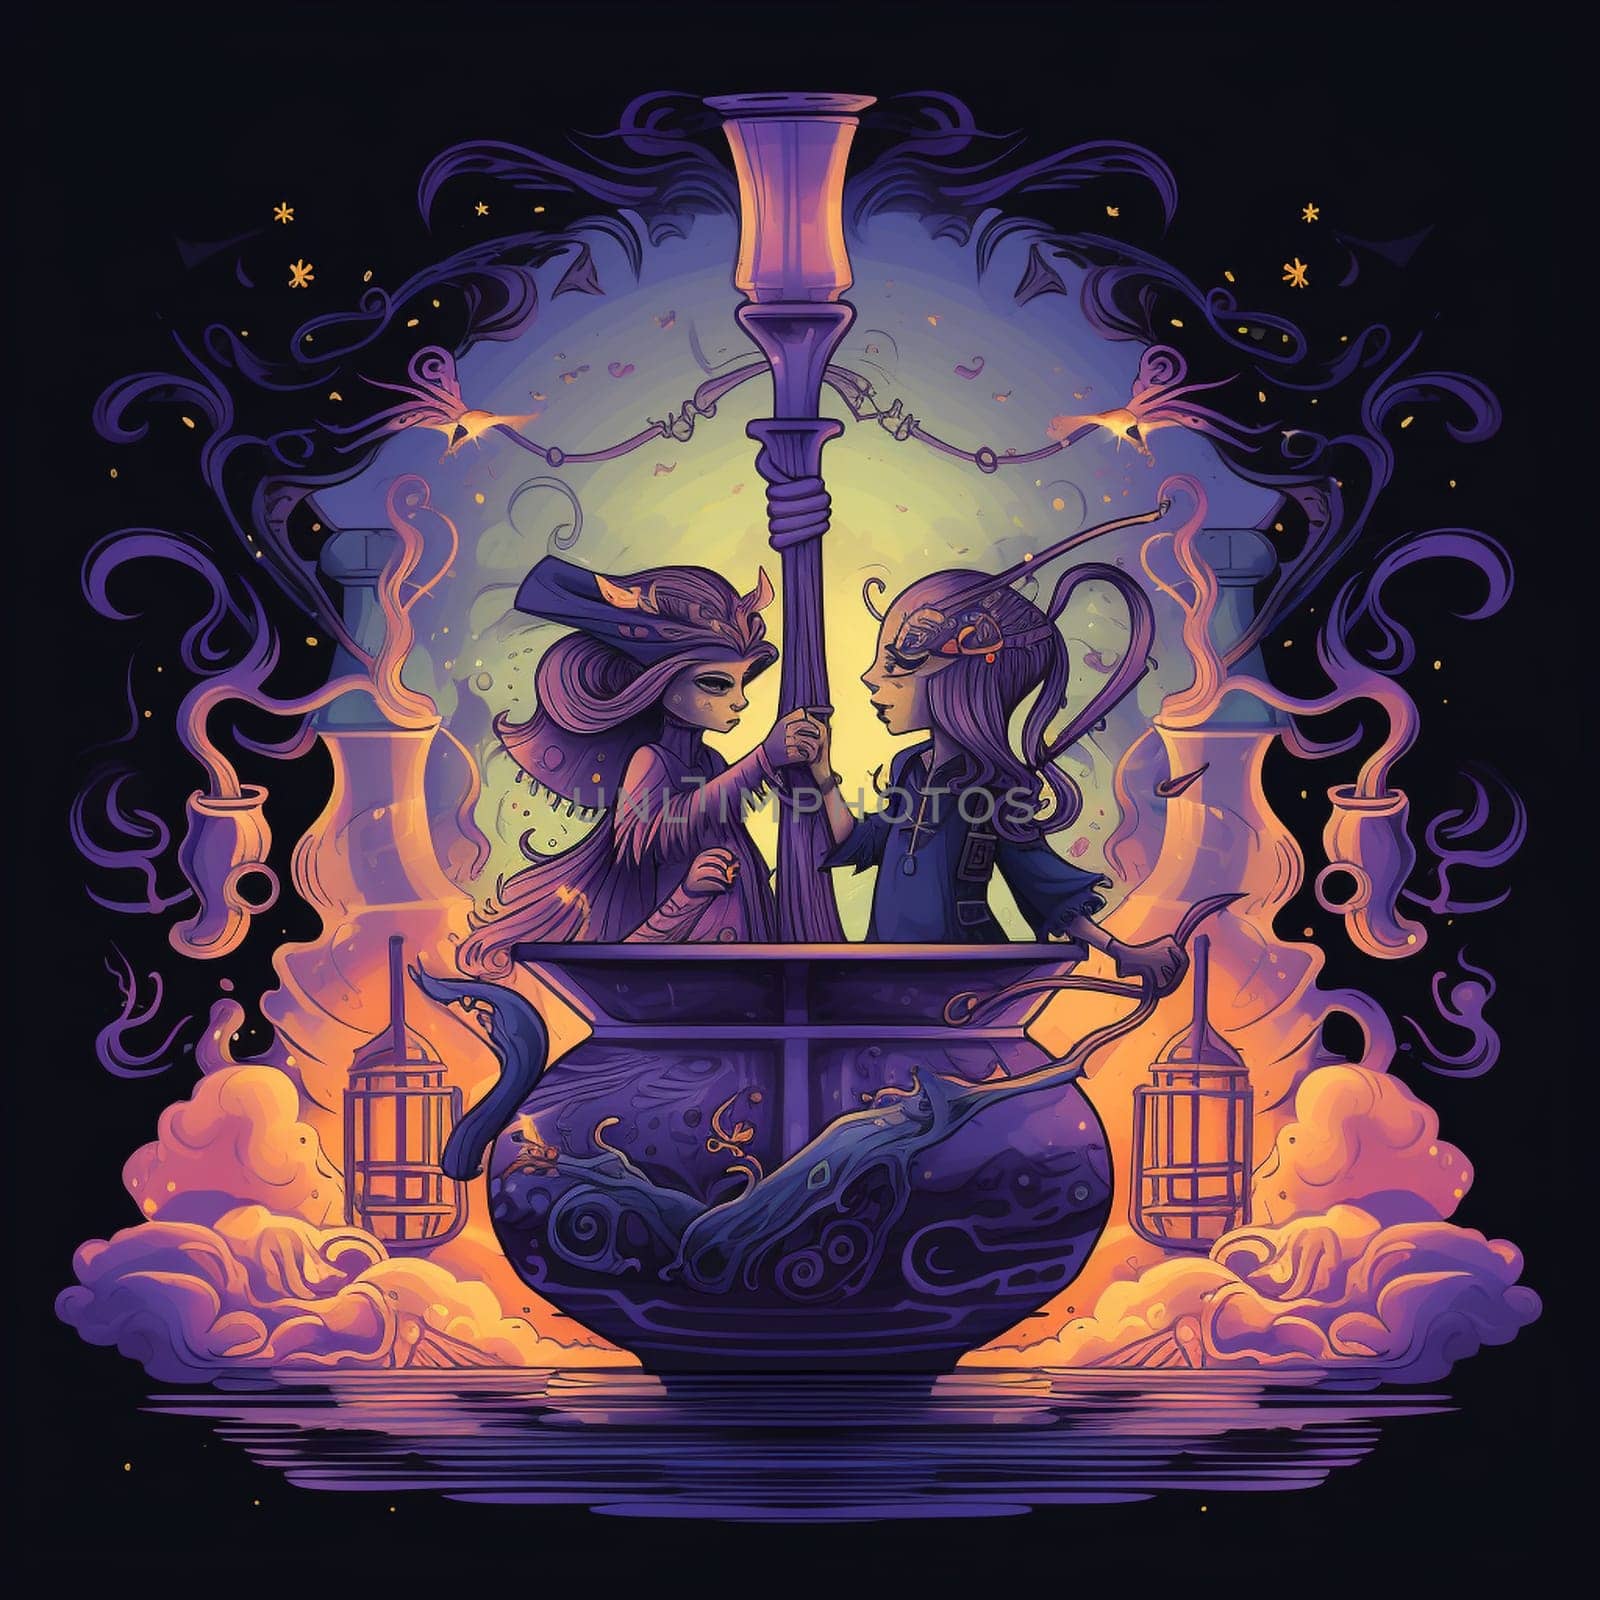 Step into a vibrant, whimsical world with this illustration depicting the concept of 'Harmony's Elixir: Vows Blended in a Potion of Eternal Love'. In this fantastical scene, a couple stands beside a bubbling cauldron, each holding a vial filled with colorful liquids symbolizing their individual vows. As they pour their respective potions into the cauldron, the elixir transforms into a vibrant and harmonious blend, radiating with love and enchantment. The image captures the joy and anticipation reflected on their faces as they witness the transformative power of their vows mixed together, symbolizing their everlasting bond. Let this artwork captivate you with its enchanting portrayal of the magic and promise of uniting souls through marriage.